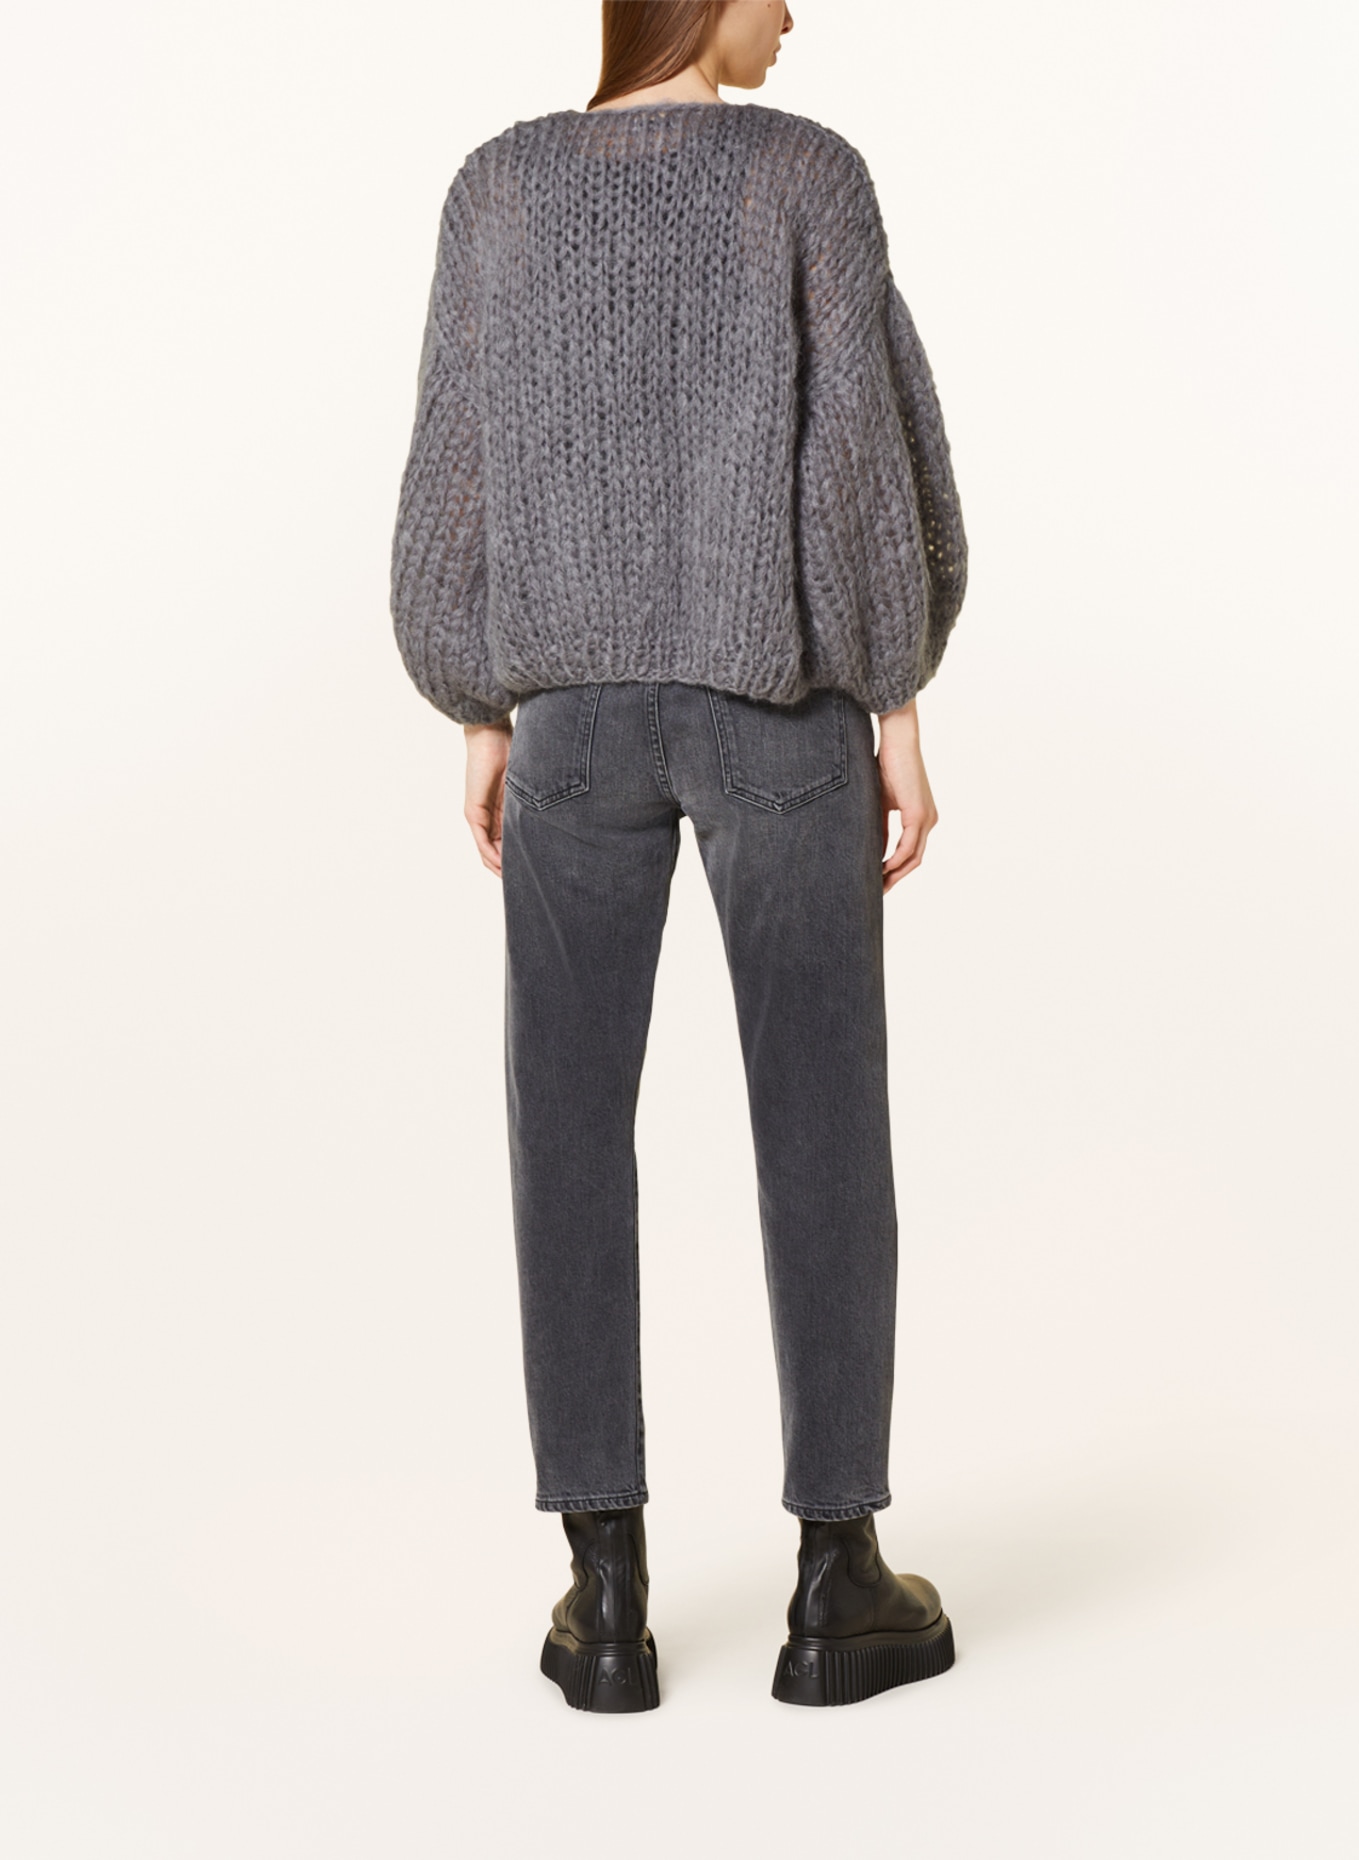 MAIAMI Oversized knit cardigan made of mohair, Color: DARK GRAY (Image 3)